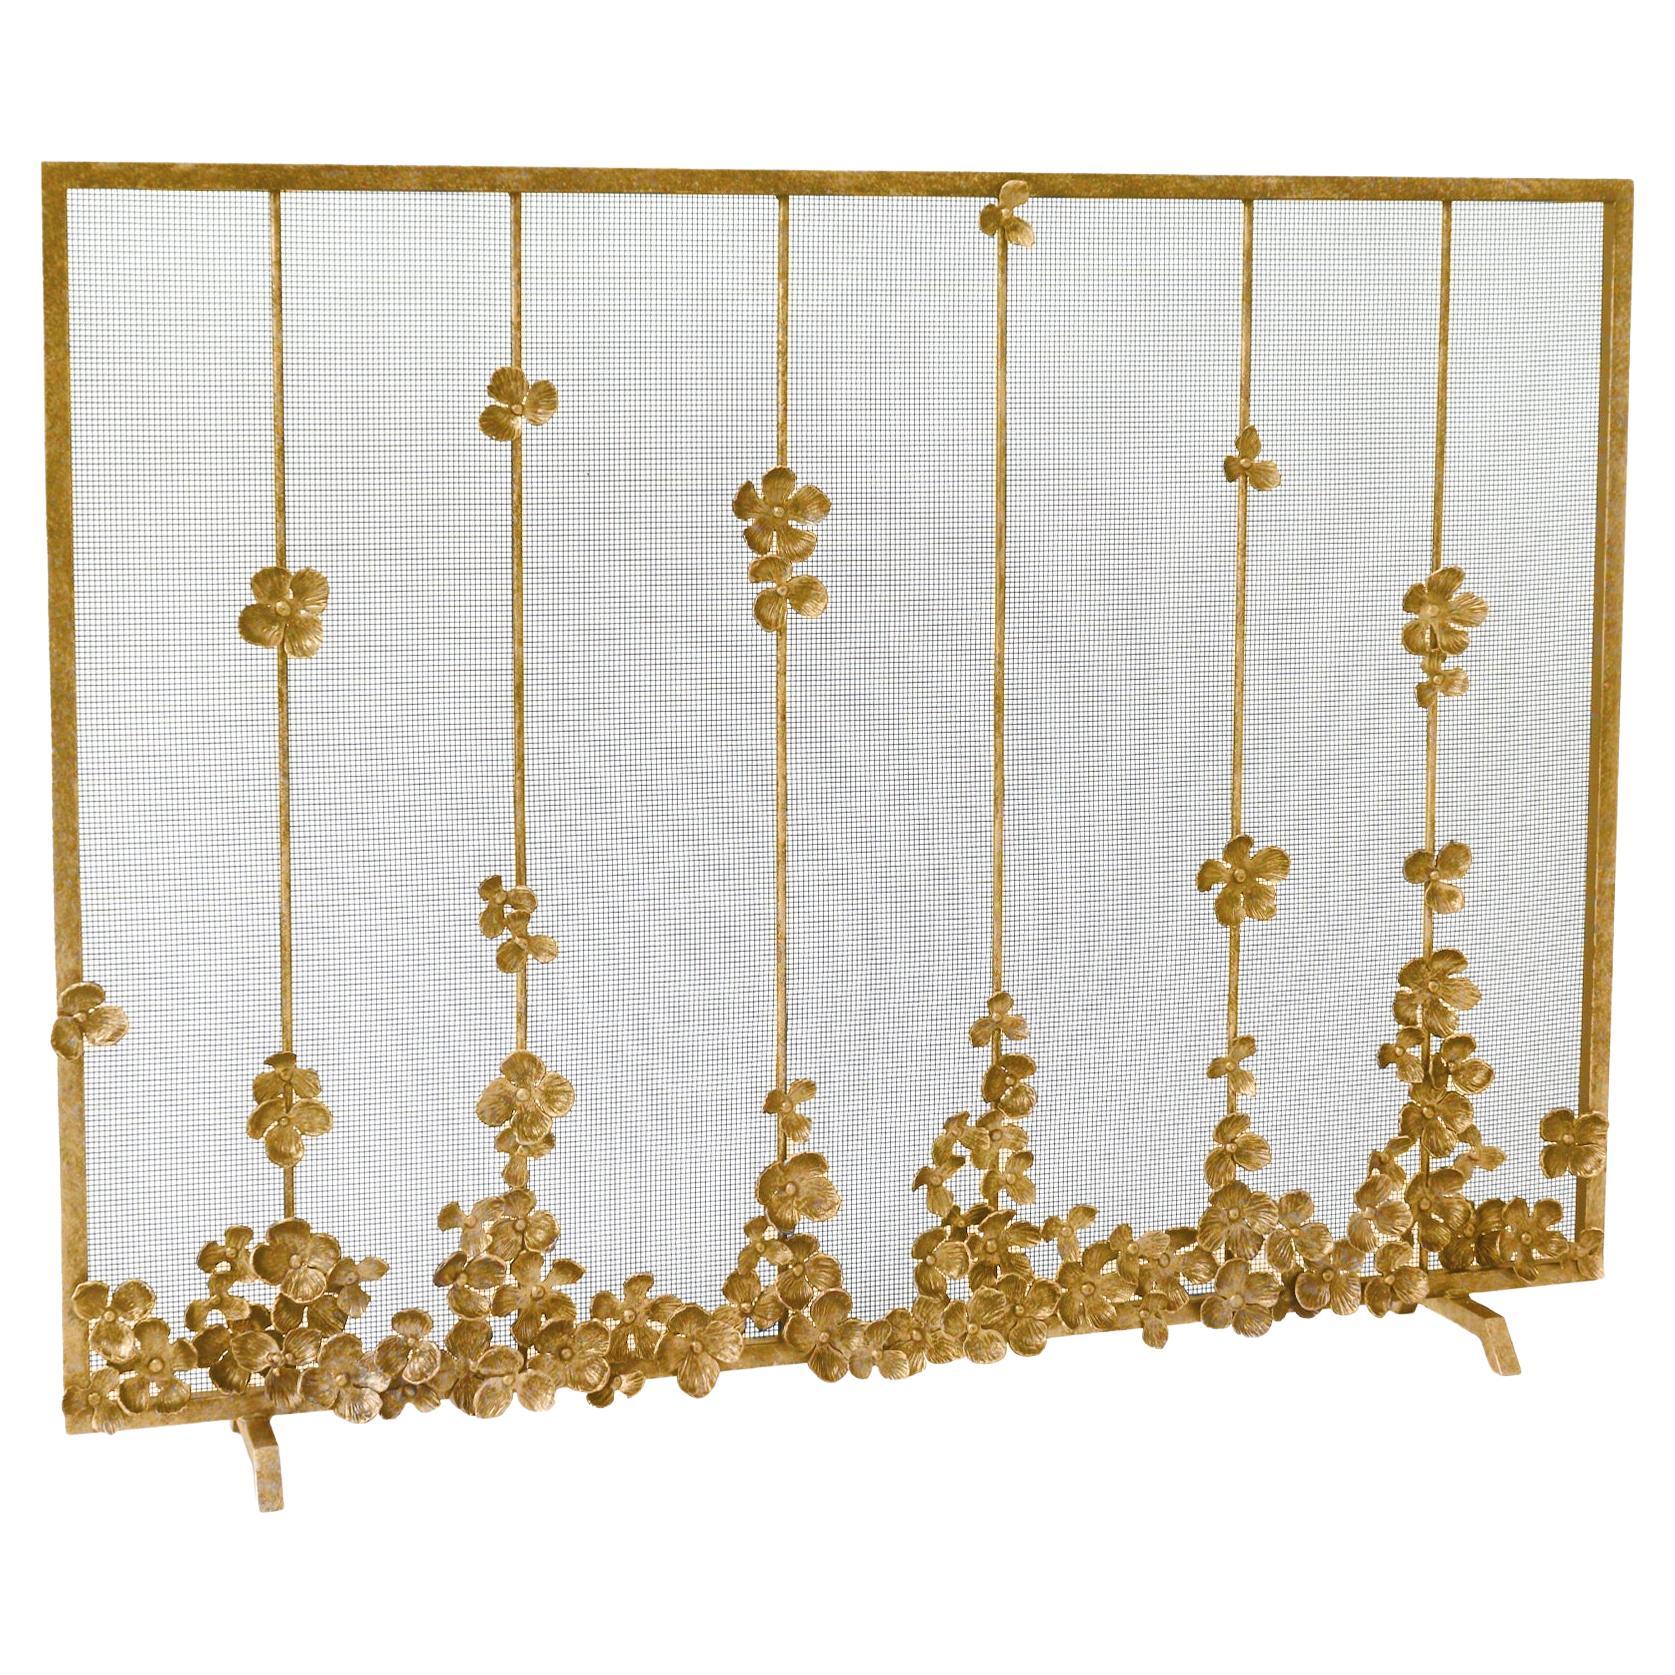 Cascading Blooms Fireplace Screen in Brilliant Gold 